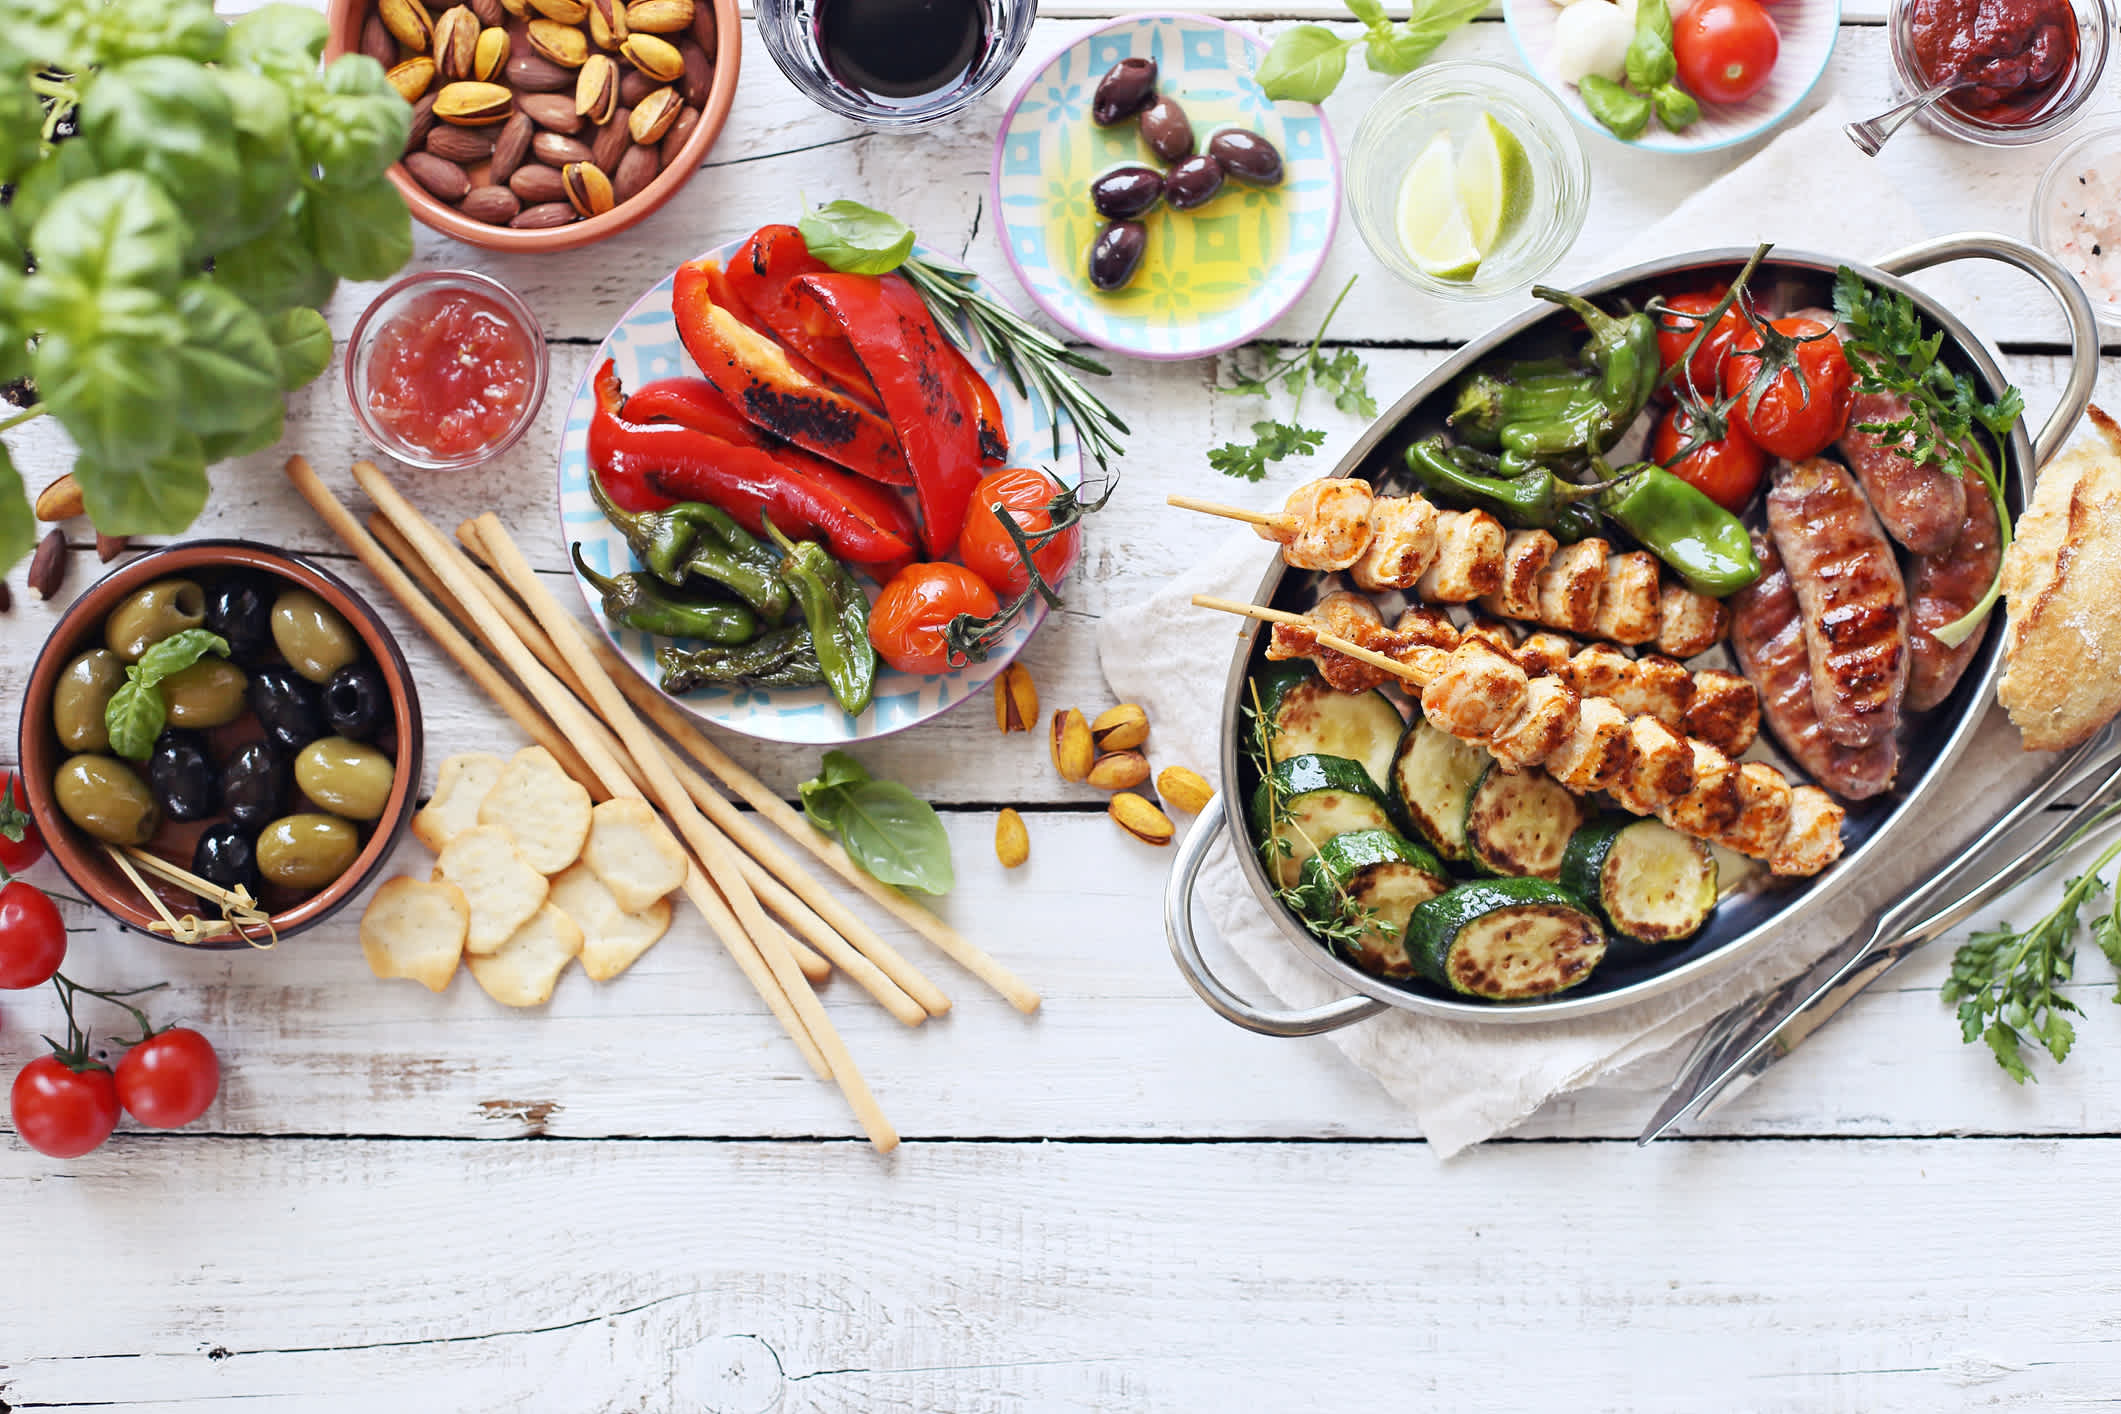 A table with traditional Greek food - grilled meat, vegetables and olives. 